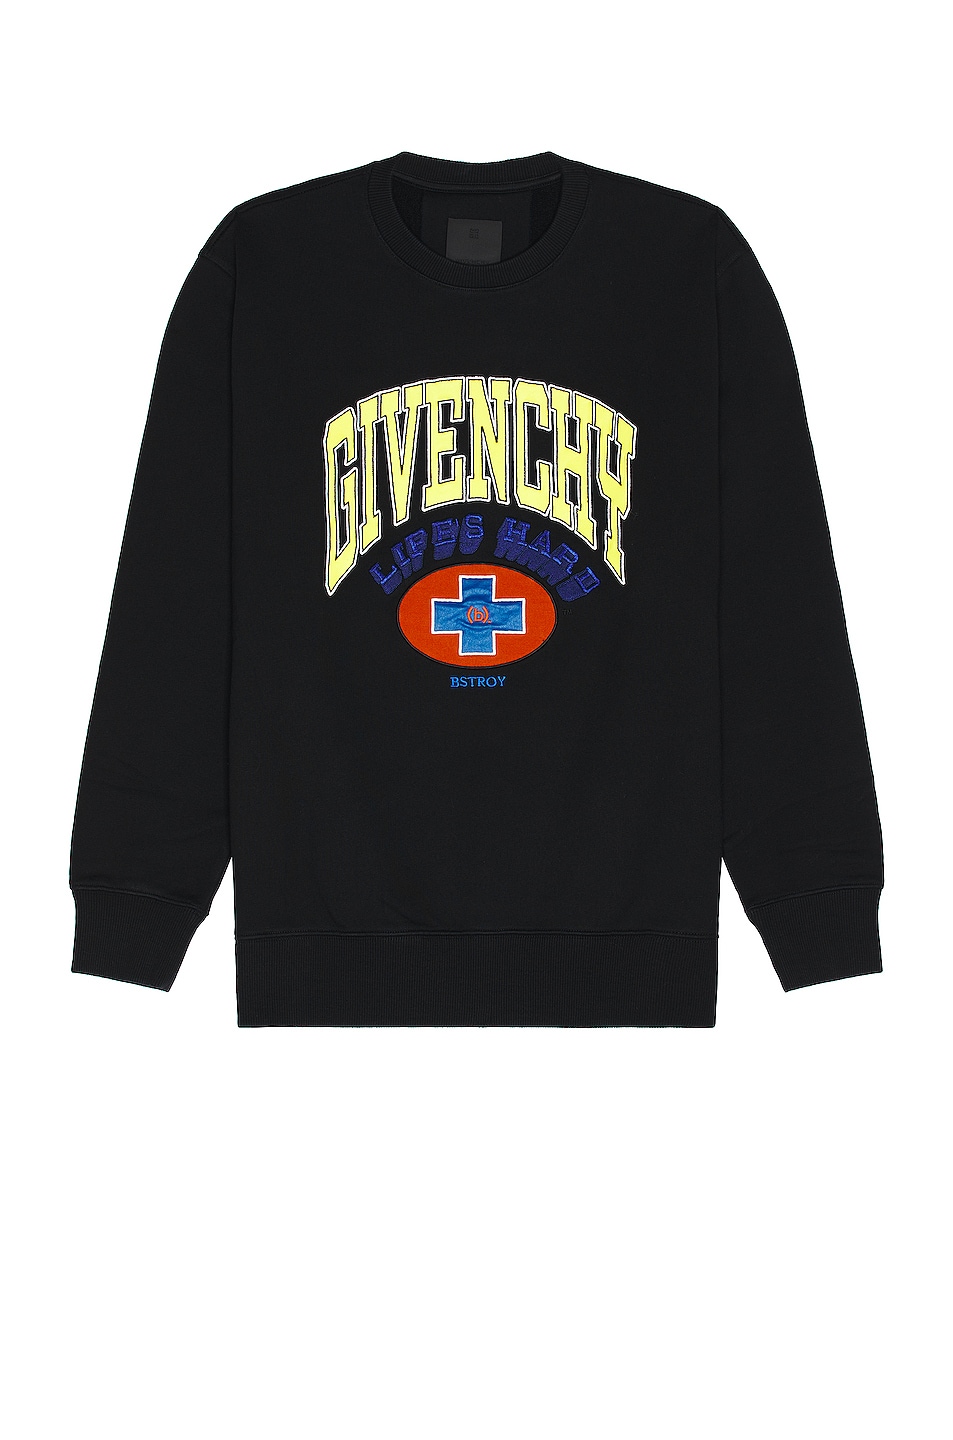 Image 1 of Givenchy B Stroy Global Peace Sweatshirt in Black